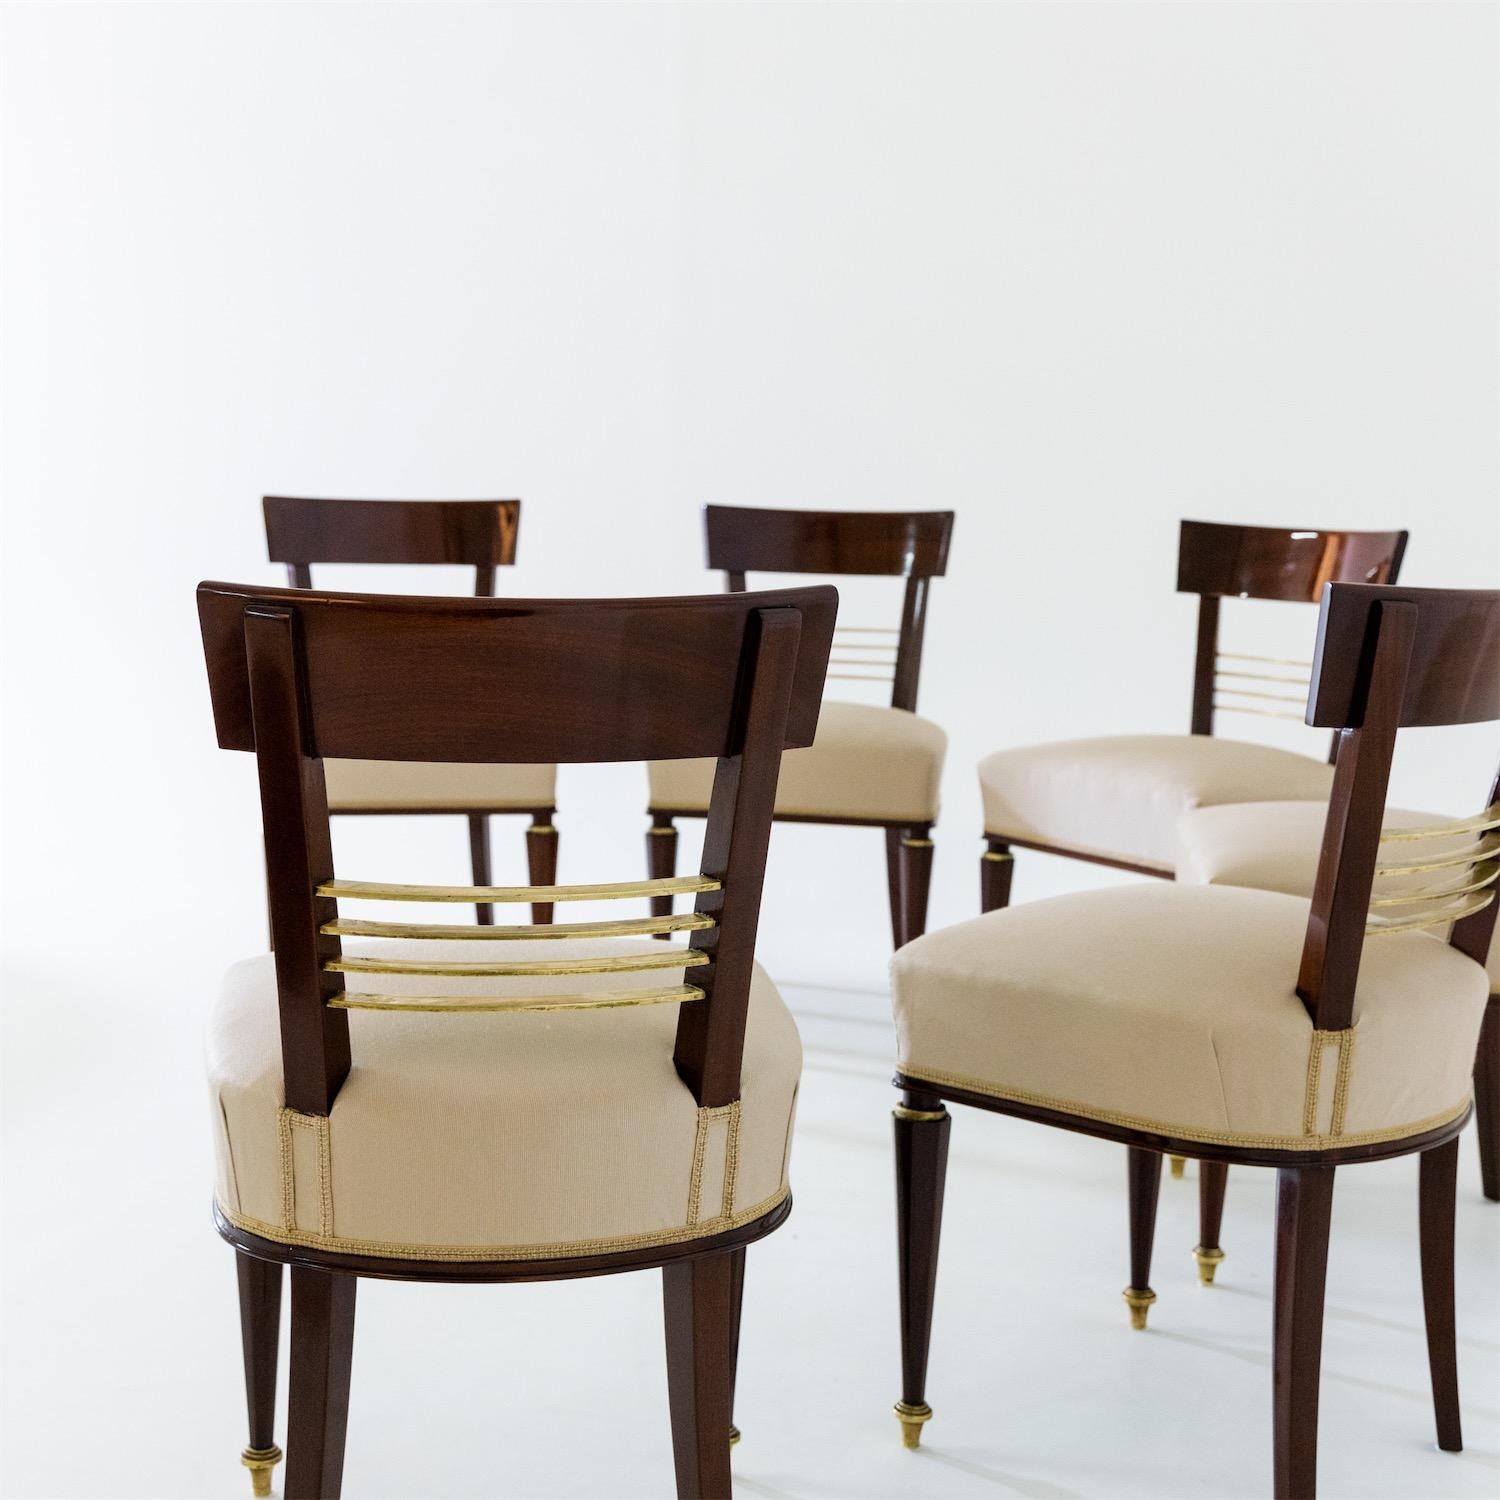 Set of Six Dining Room Chairs, Mid-19th Century 4